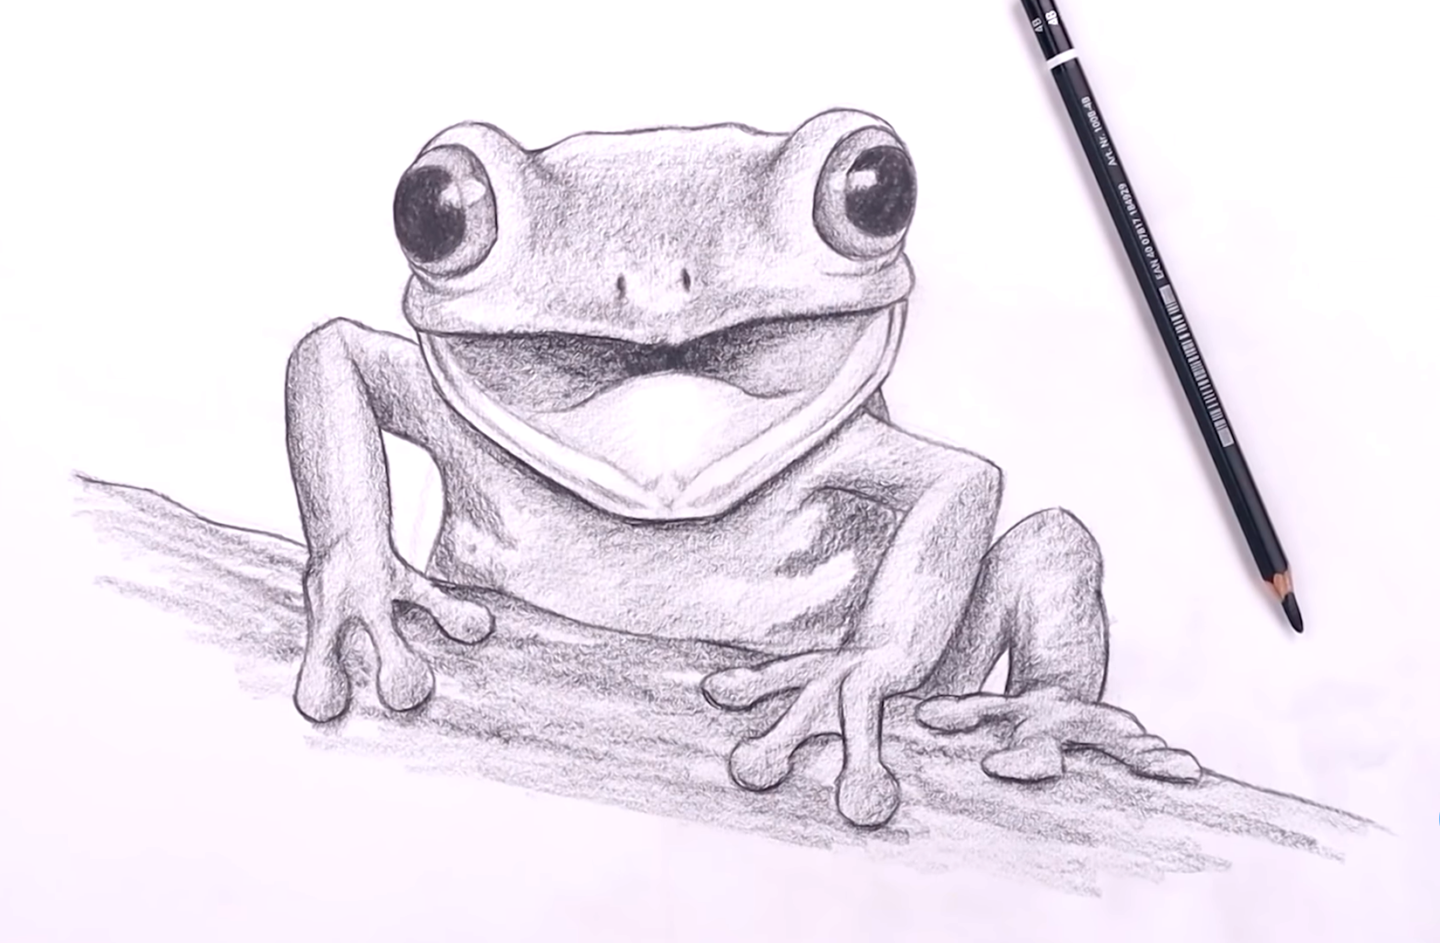 How To Draw Tree Frog By CARTOONING CLUB HOW TO DRAW